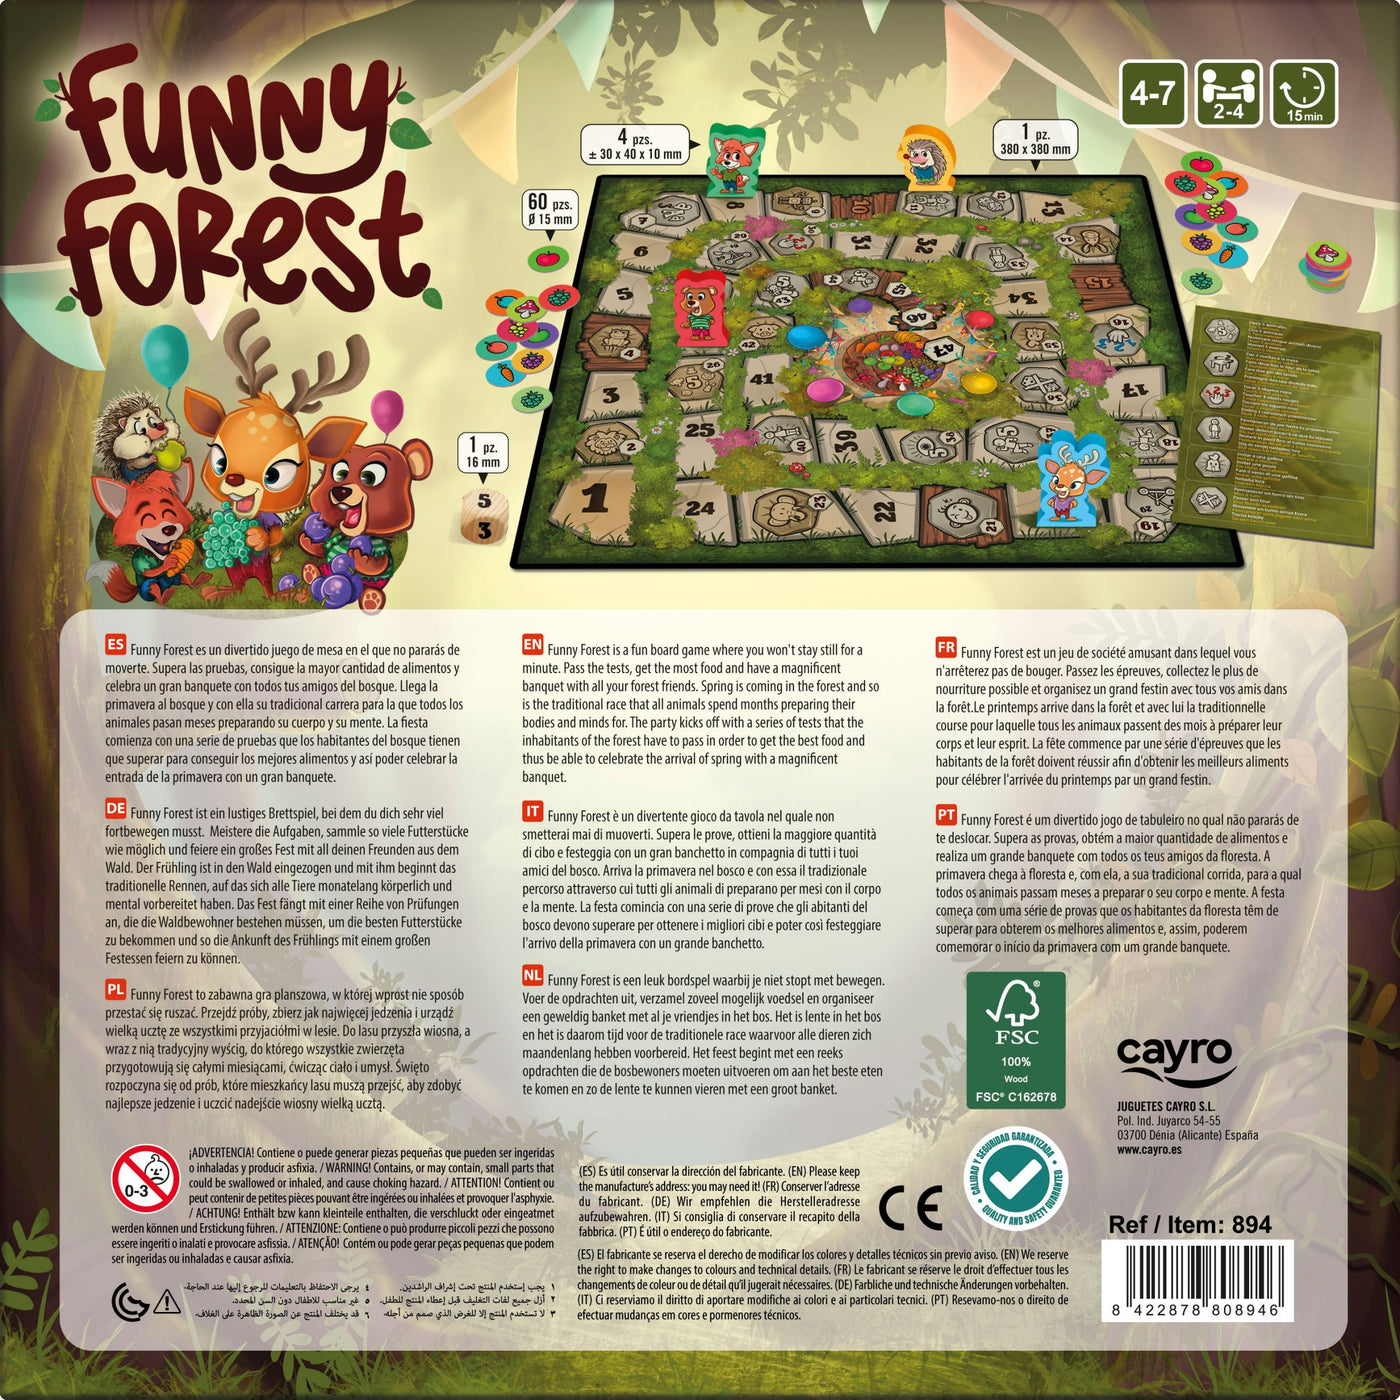 Funny Forest - Cayro